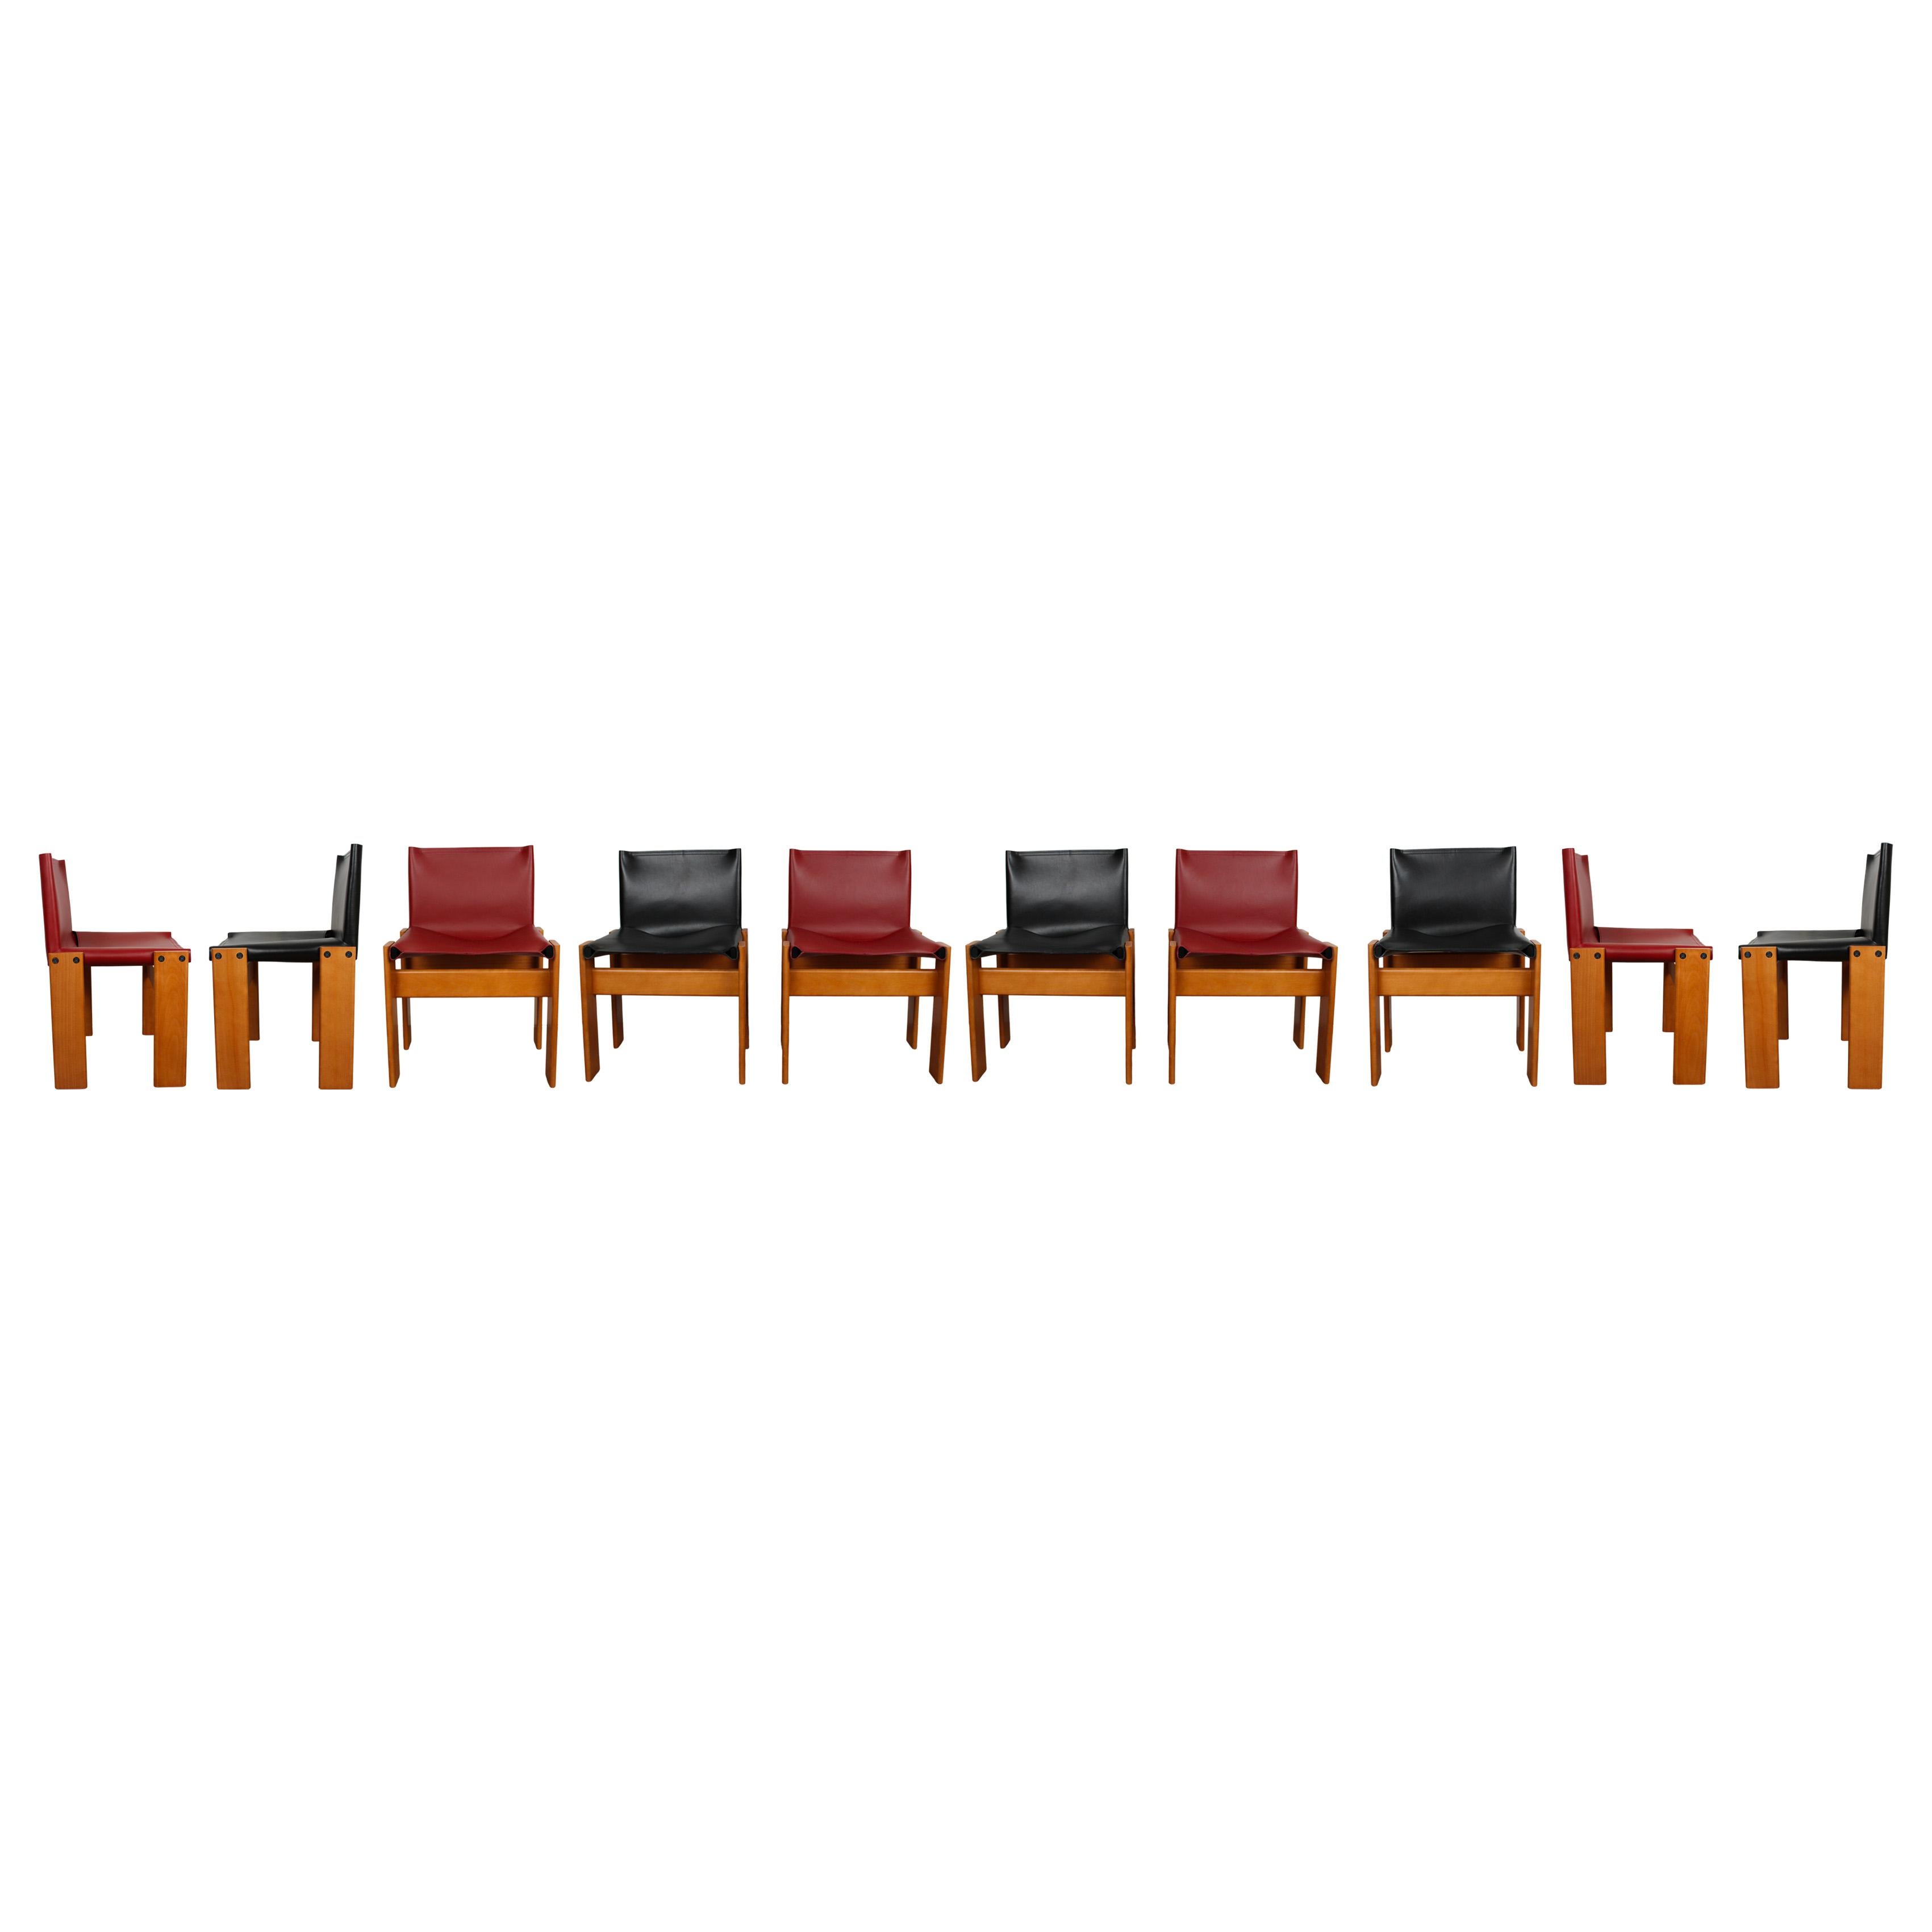 Italian Afra & Tobia Scarpa Black & Red Leather Monk Dining Chair for Molteni, Set of 10 For Sale